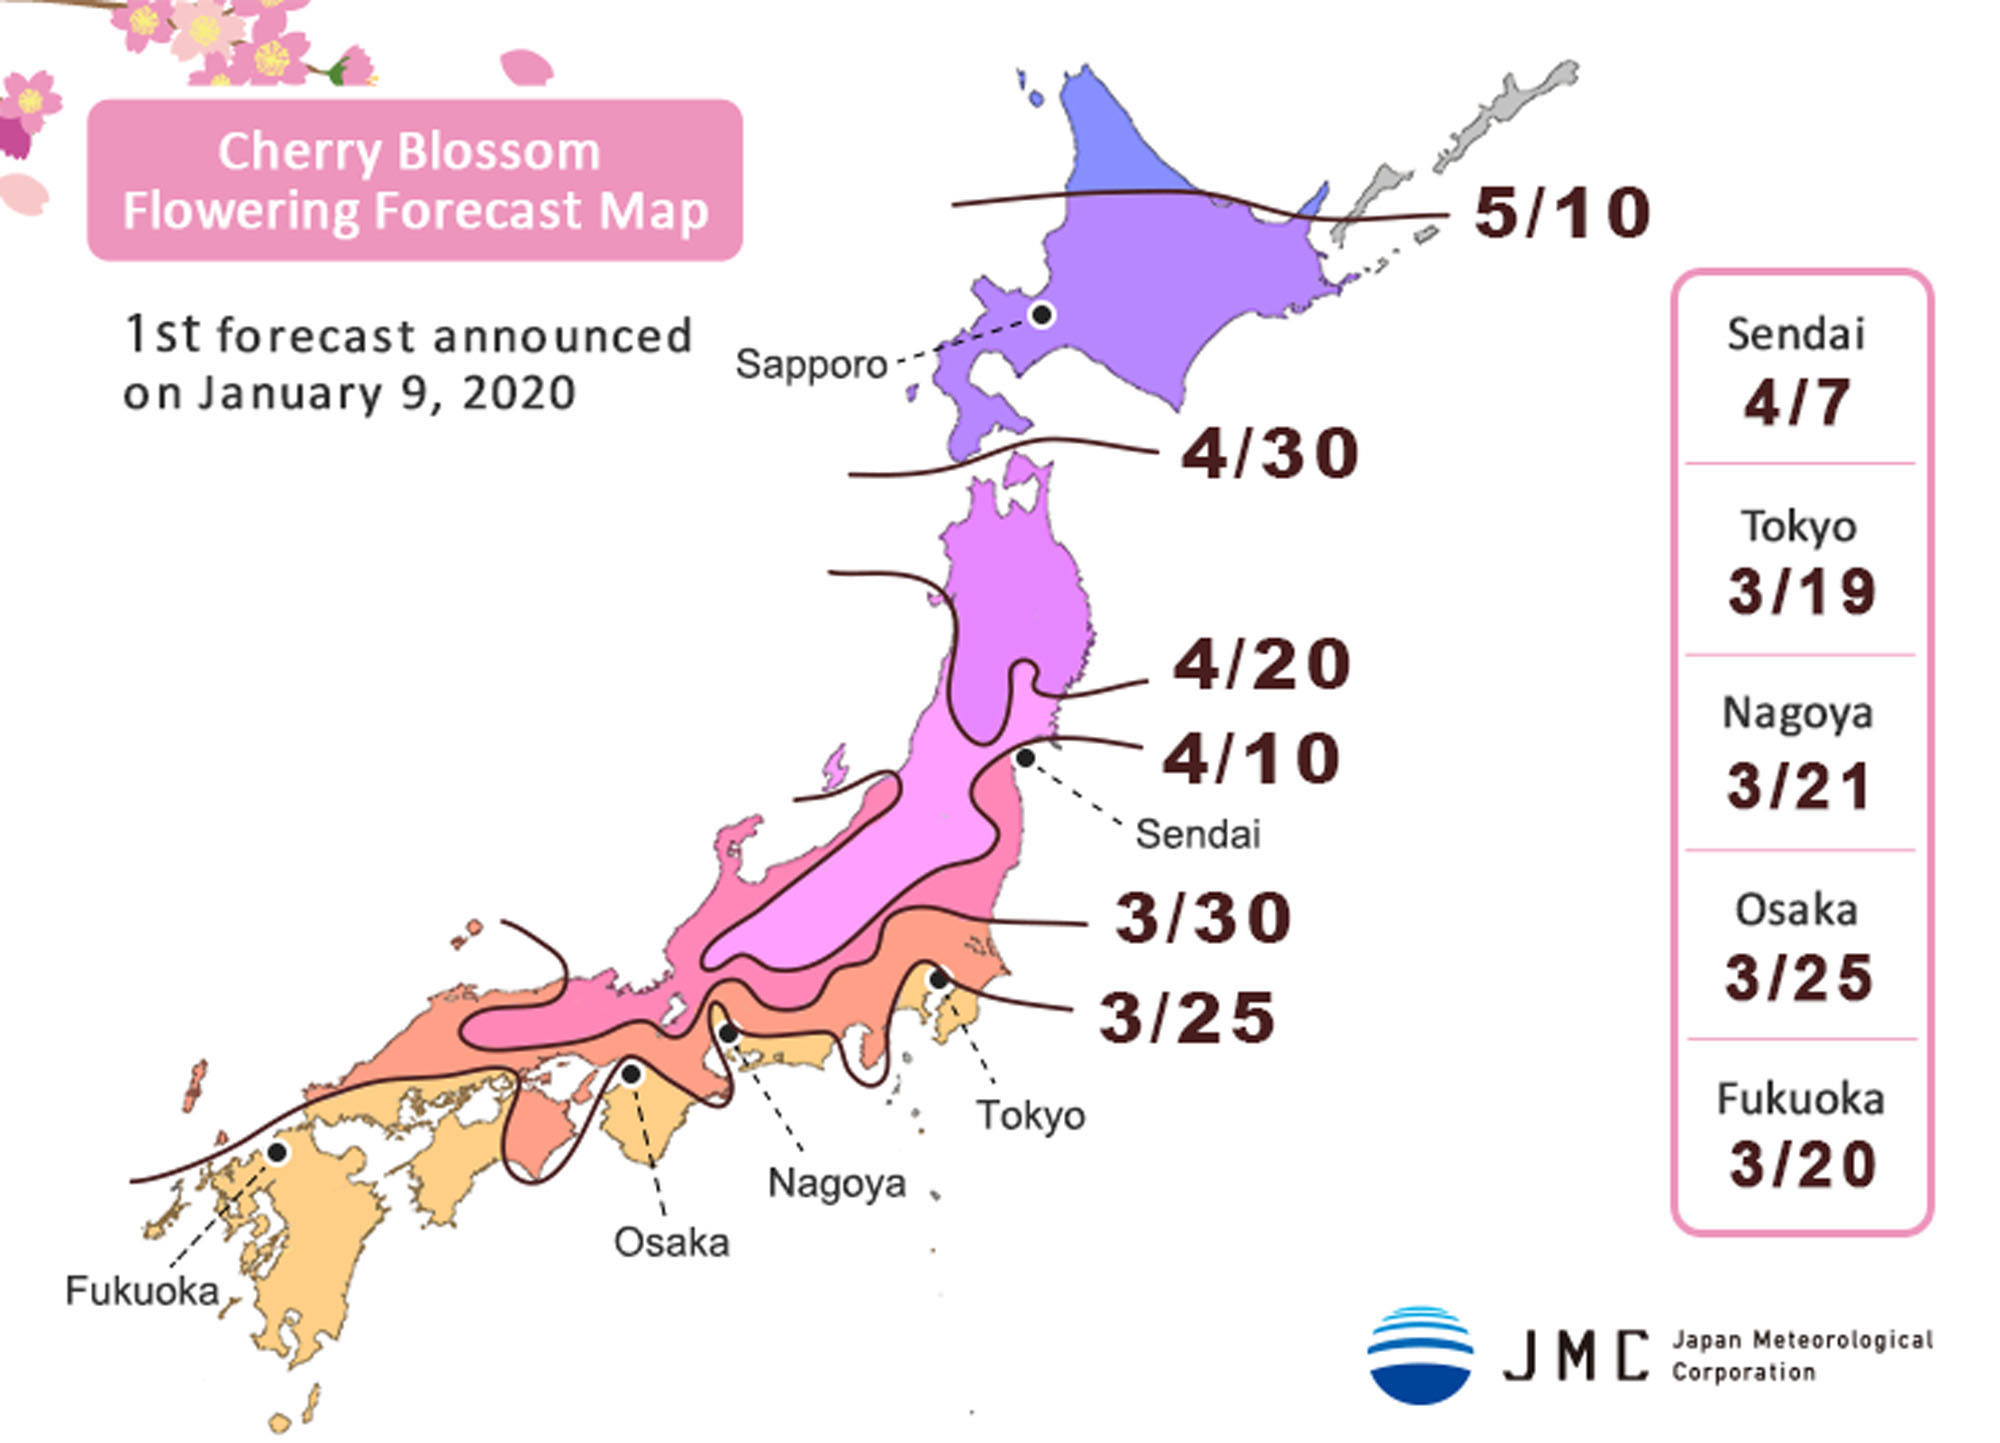 Tokyo Weather: from Spring Cherry Blossoms in March to November